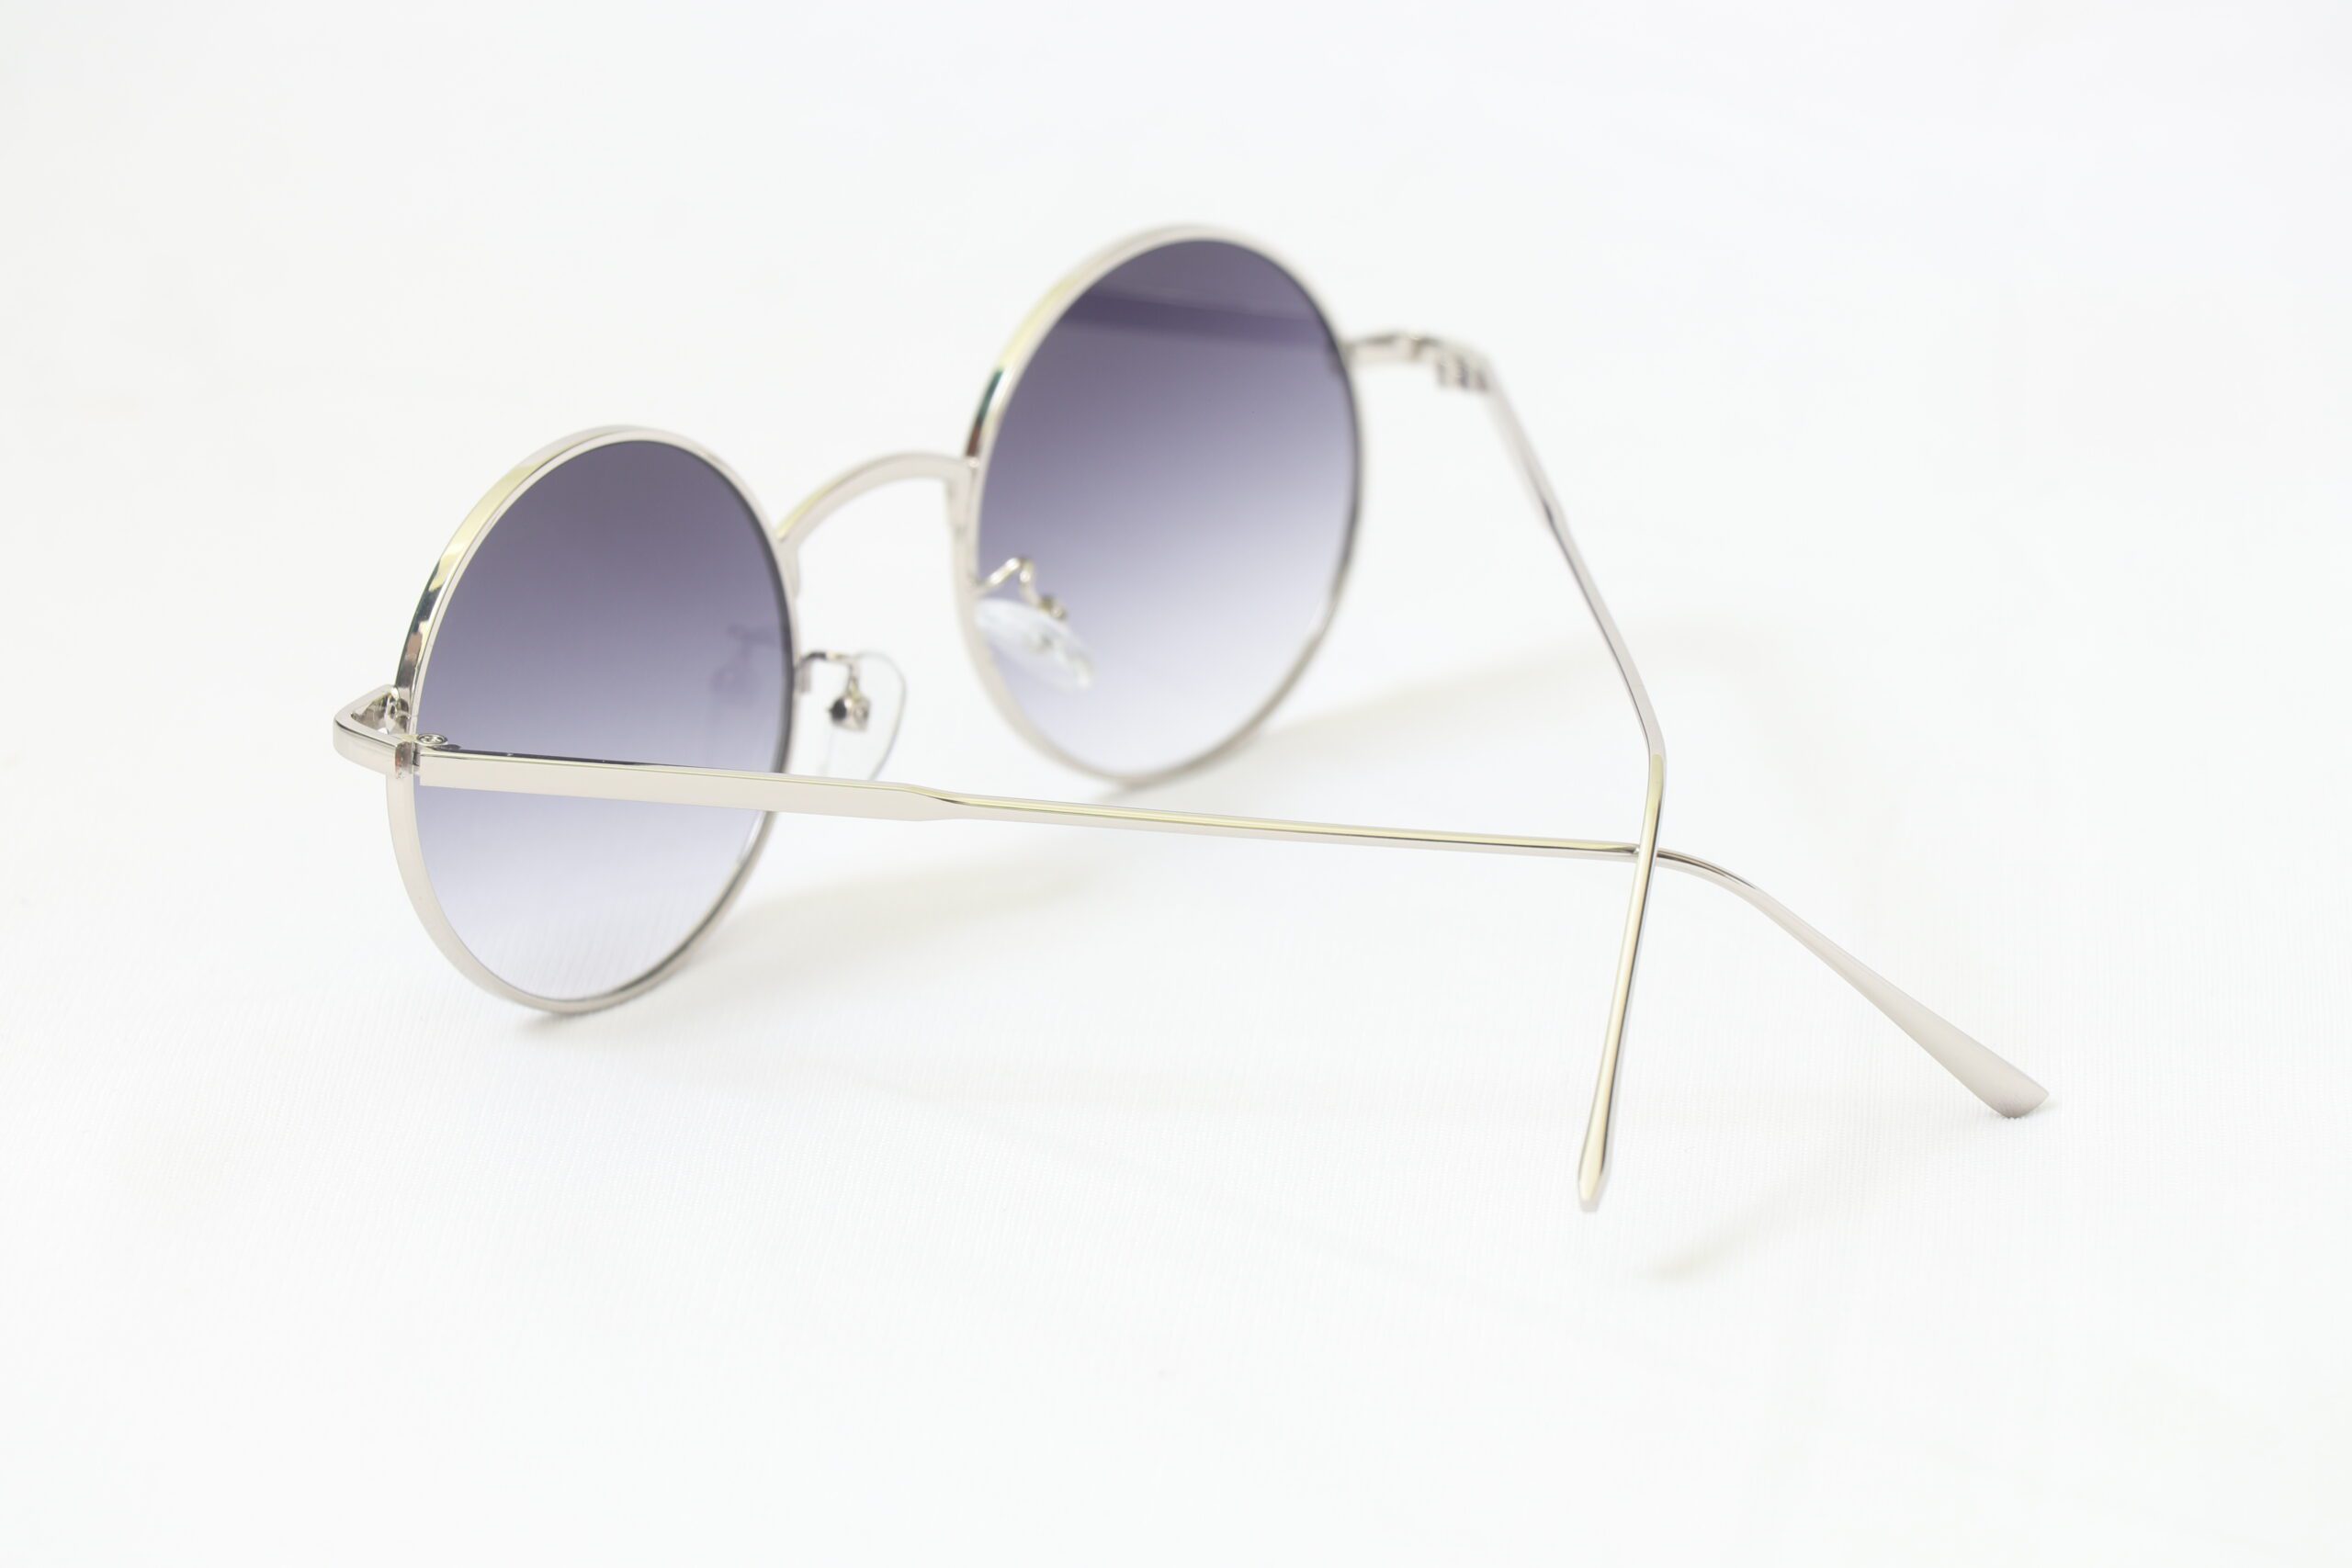 Metallic Round Silver Sunglasses You Could See Better 